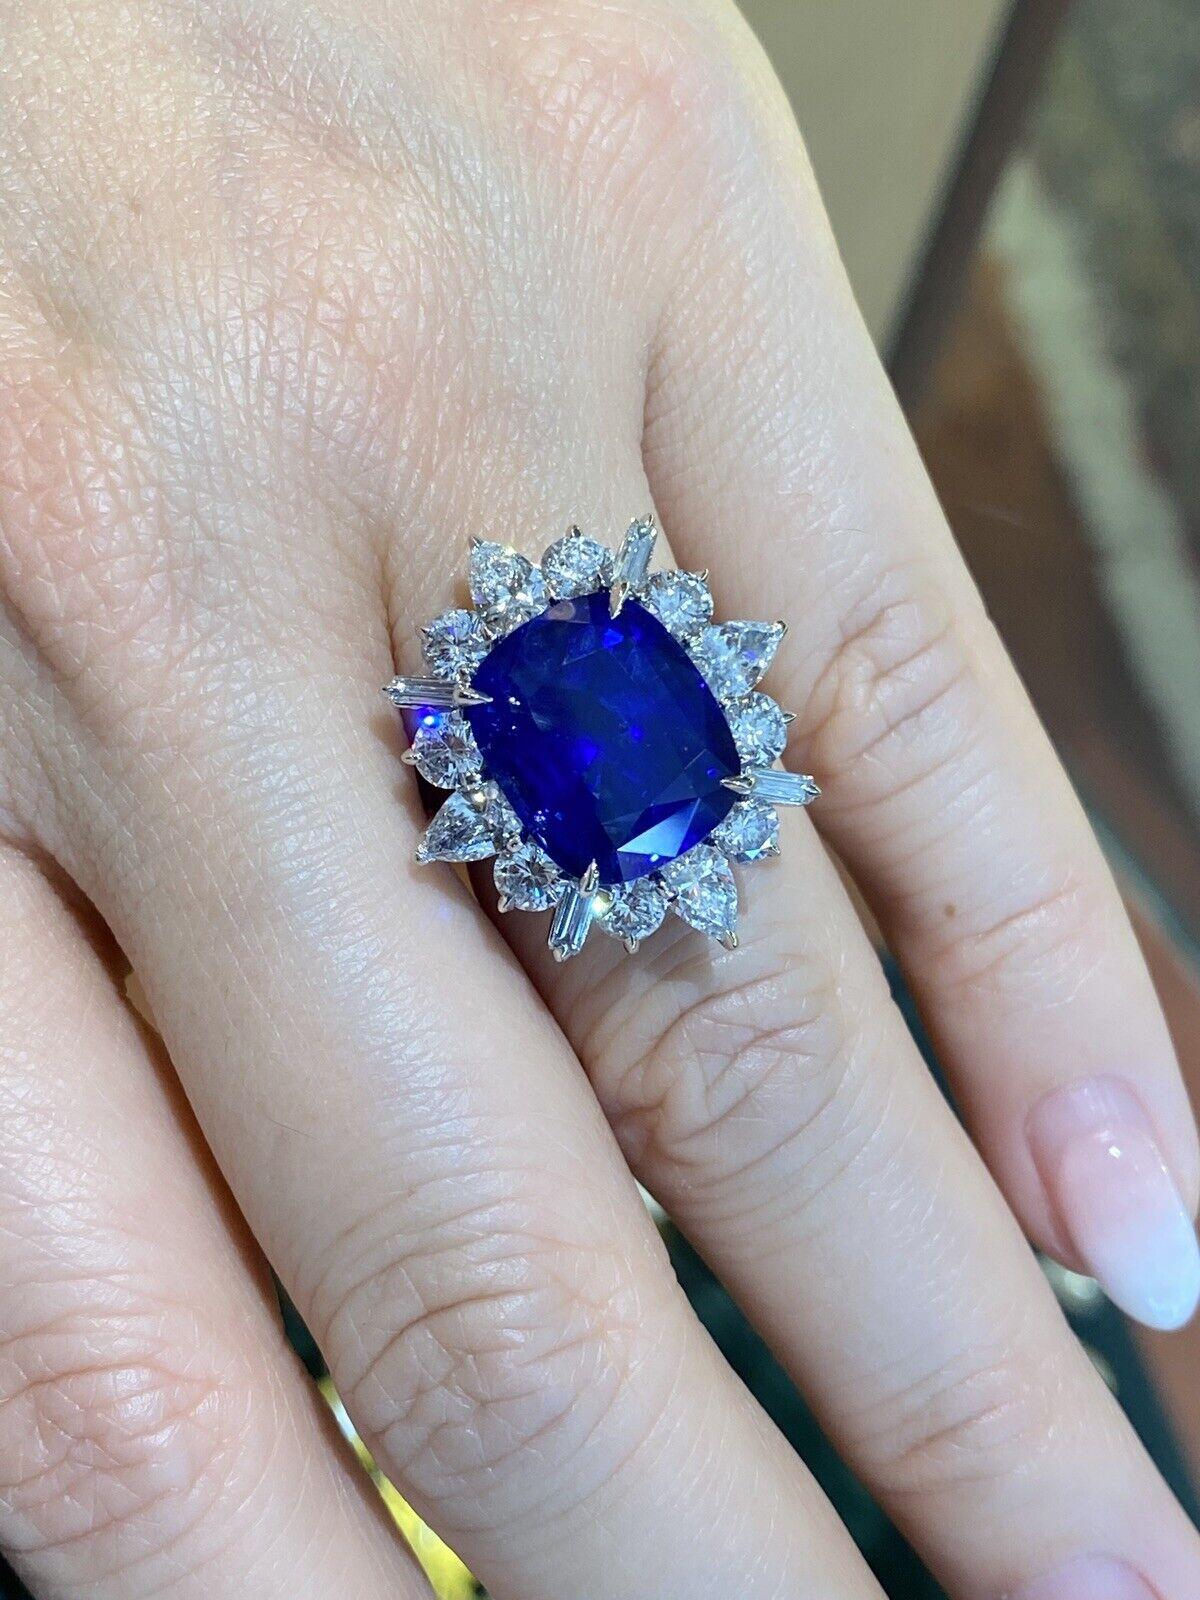 GRS Certified 13.75 ct Royal Blue Ceylon Sapphire in Diamond Platinum Halo Setting
Features
One Cushion Modified Brilliant
Royal Blue Sapphire
weighing 13.75 carats
Vibrant Vivid Blue color
Very clean
Ceylon origin
GRS certification
(*see copy of